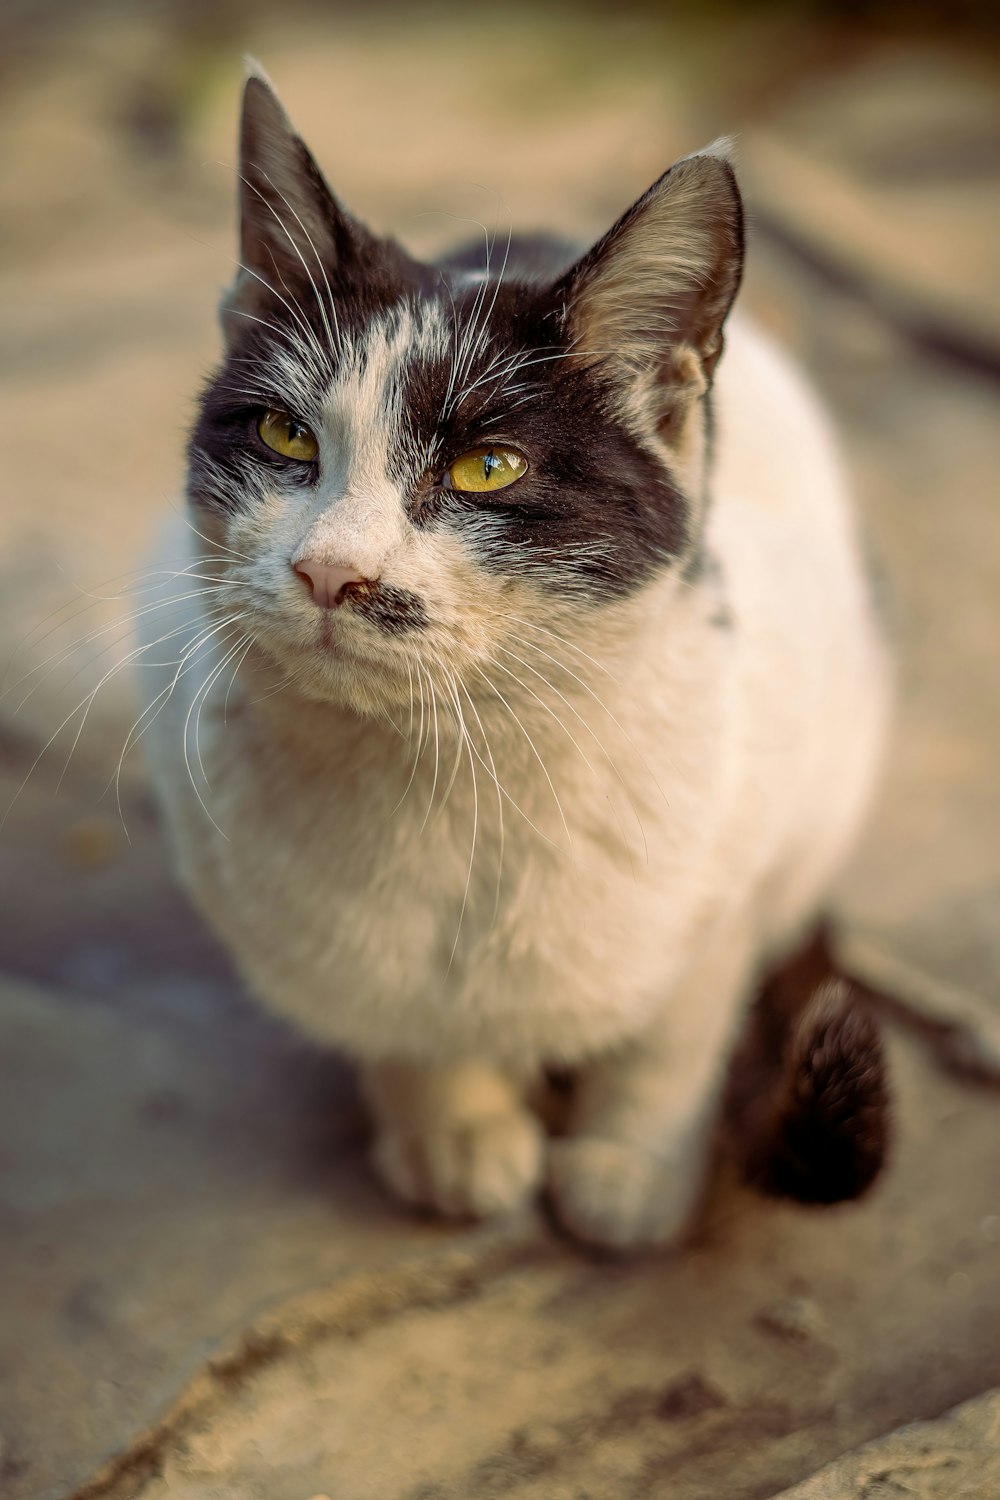 a black and white cat with yellow eyes